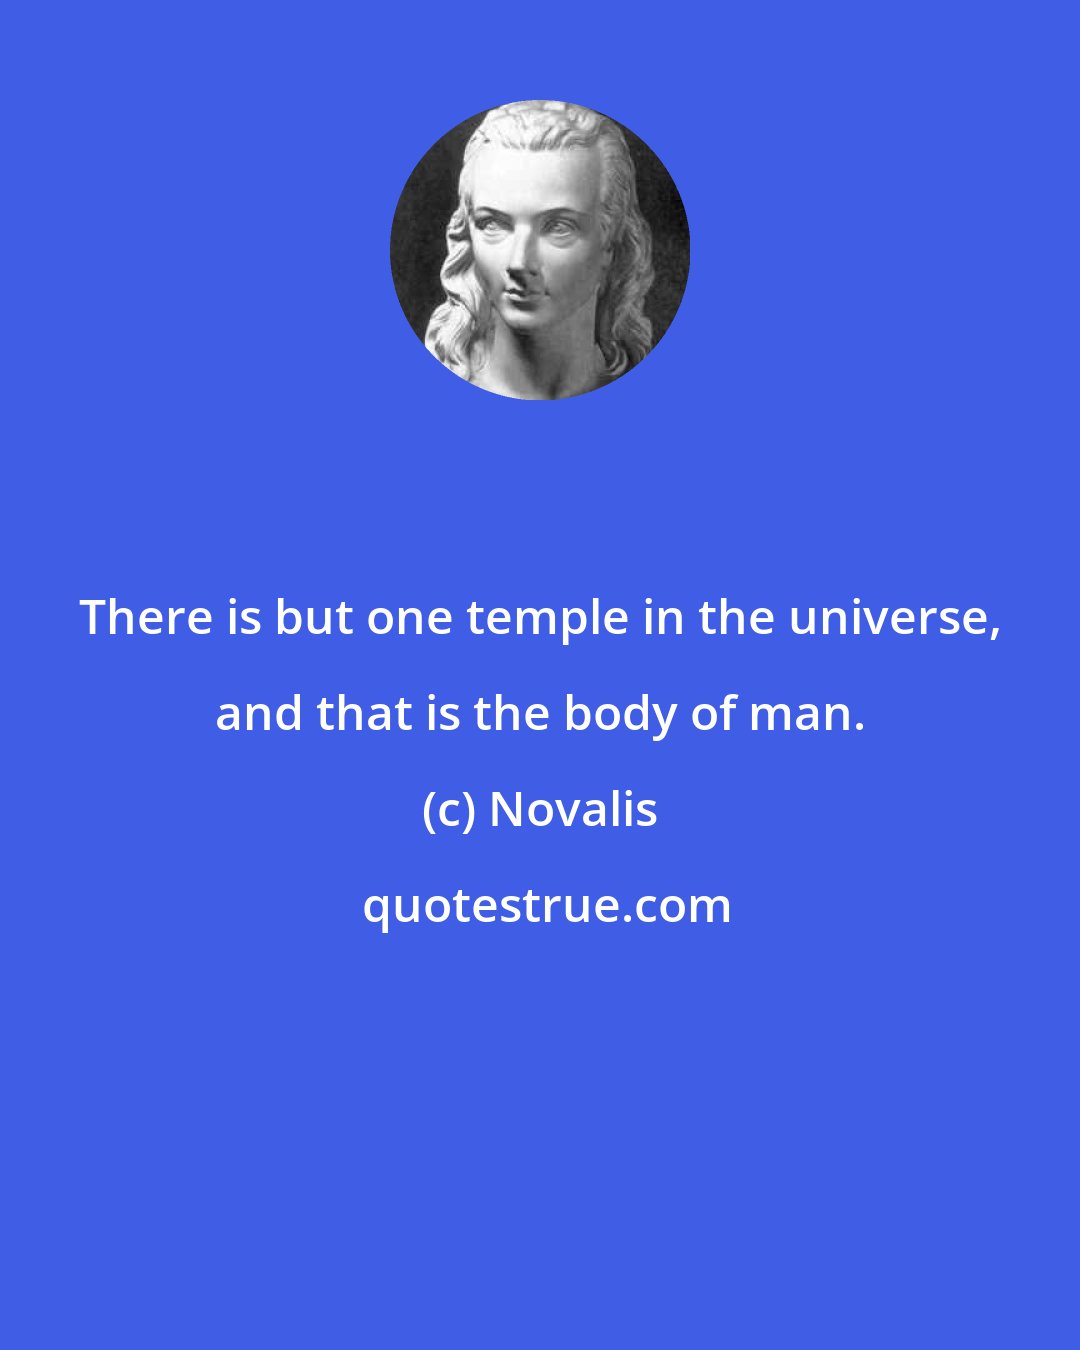 Novalis: There is but one temple in the universe, and that is the body of man.